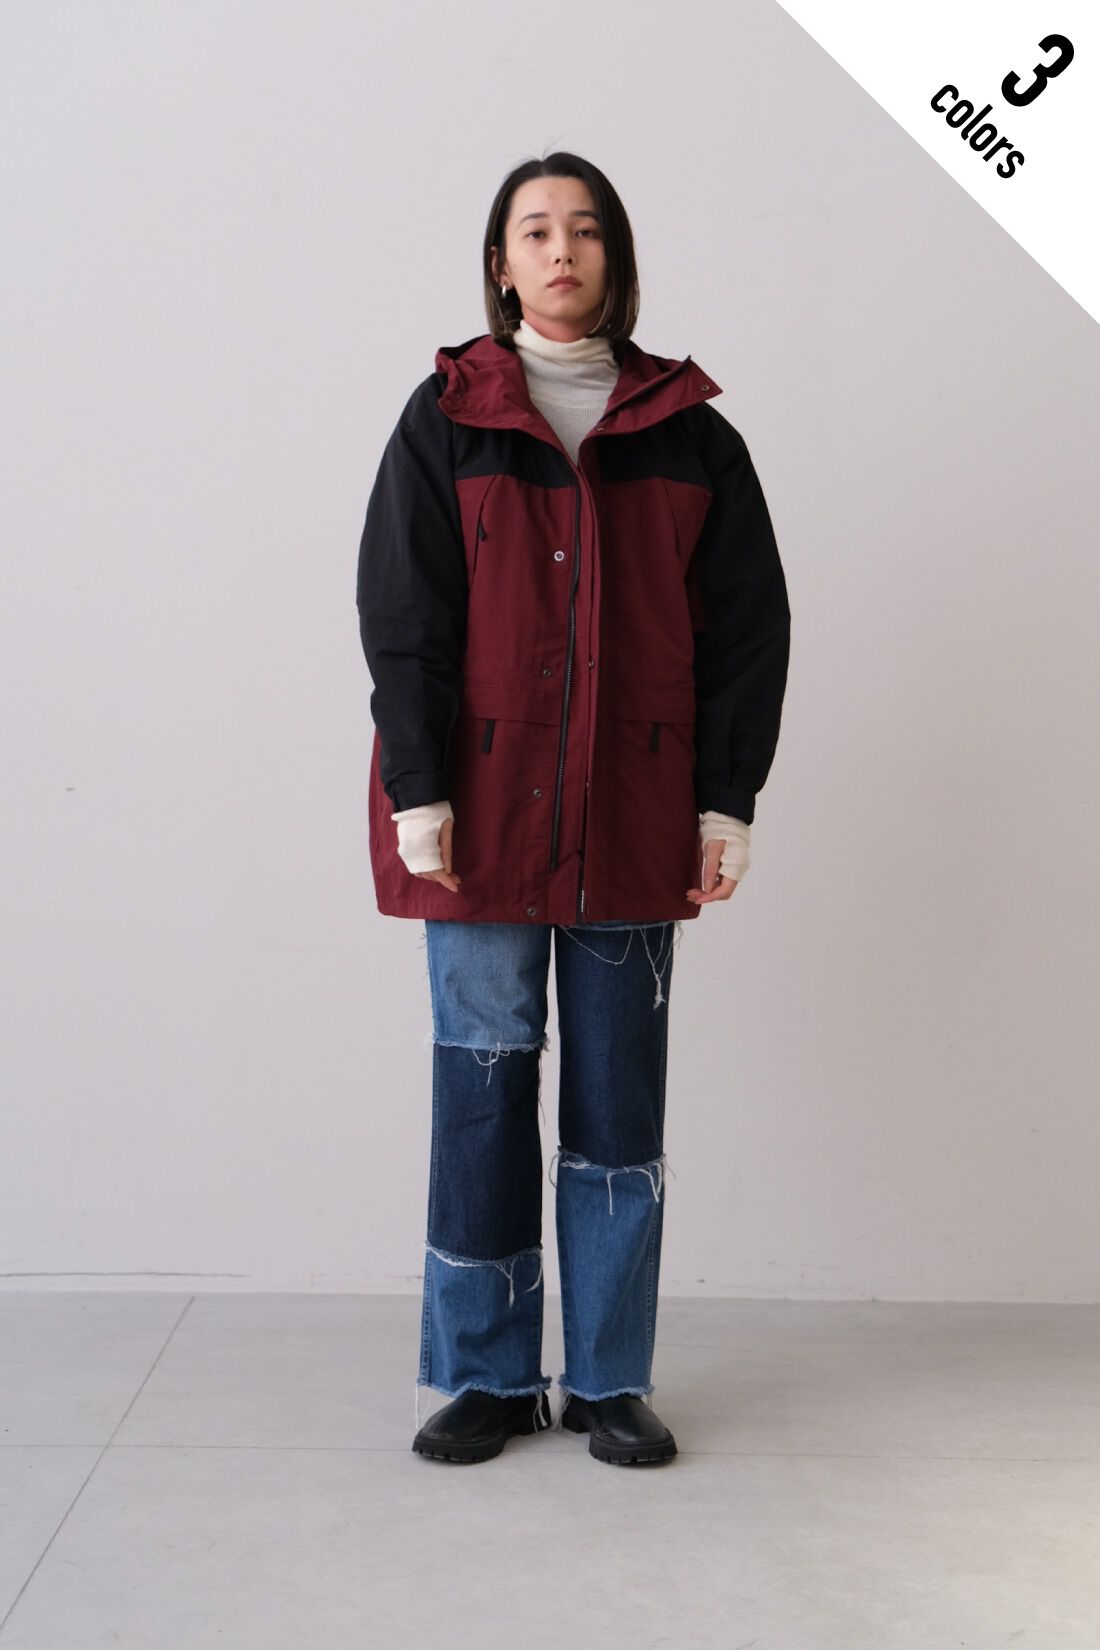 Real Stock|MEDE19F 〈SELECT〉　【GERRY】 4-WAY H MOUNTAIN JK|2 bordeaux　モデル身長：168cm